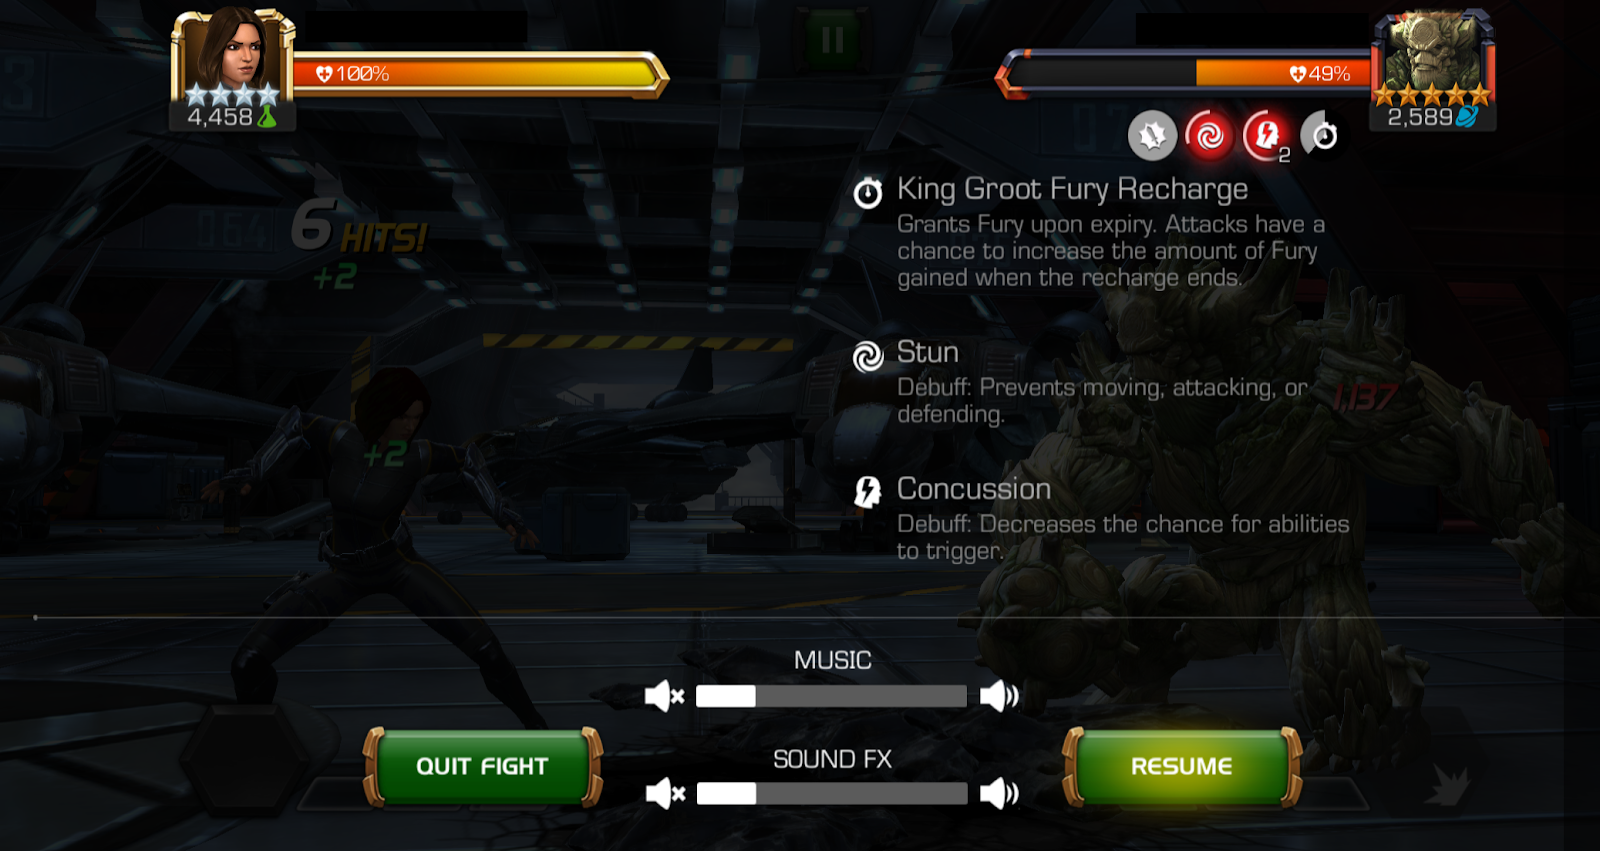 A screenshot showing the display of what the battle screen looks like when it has been paused. The status effects for the opponent are detailed under their health bar.